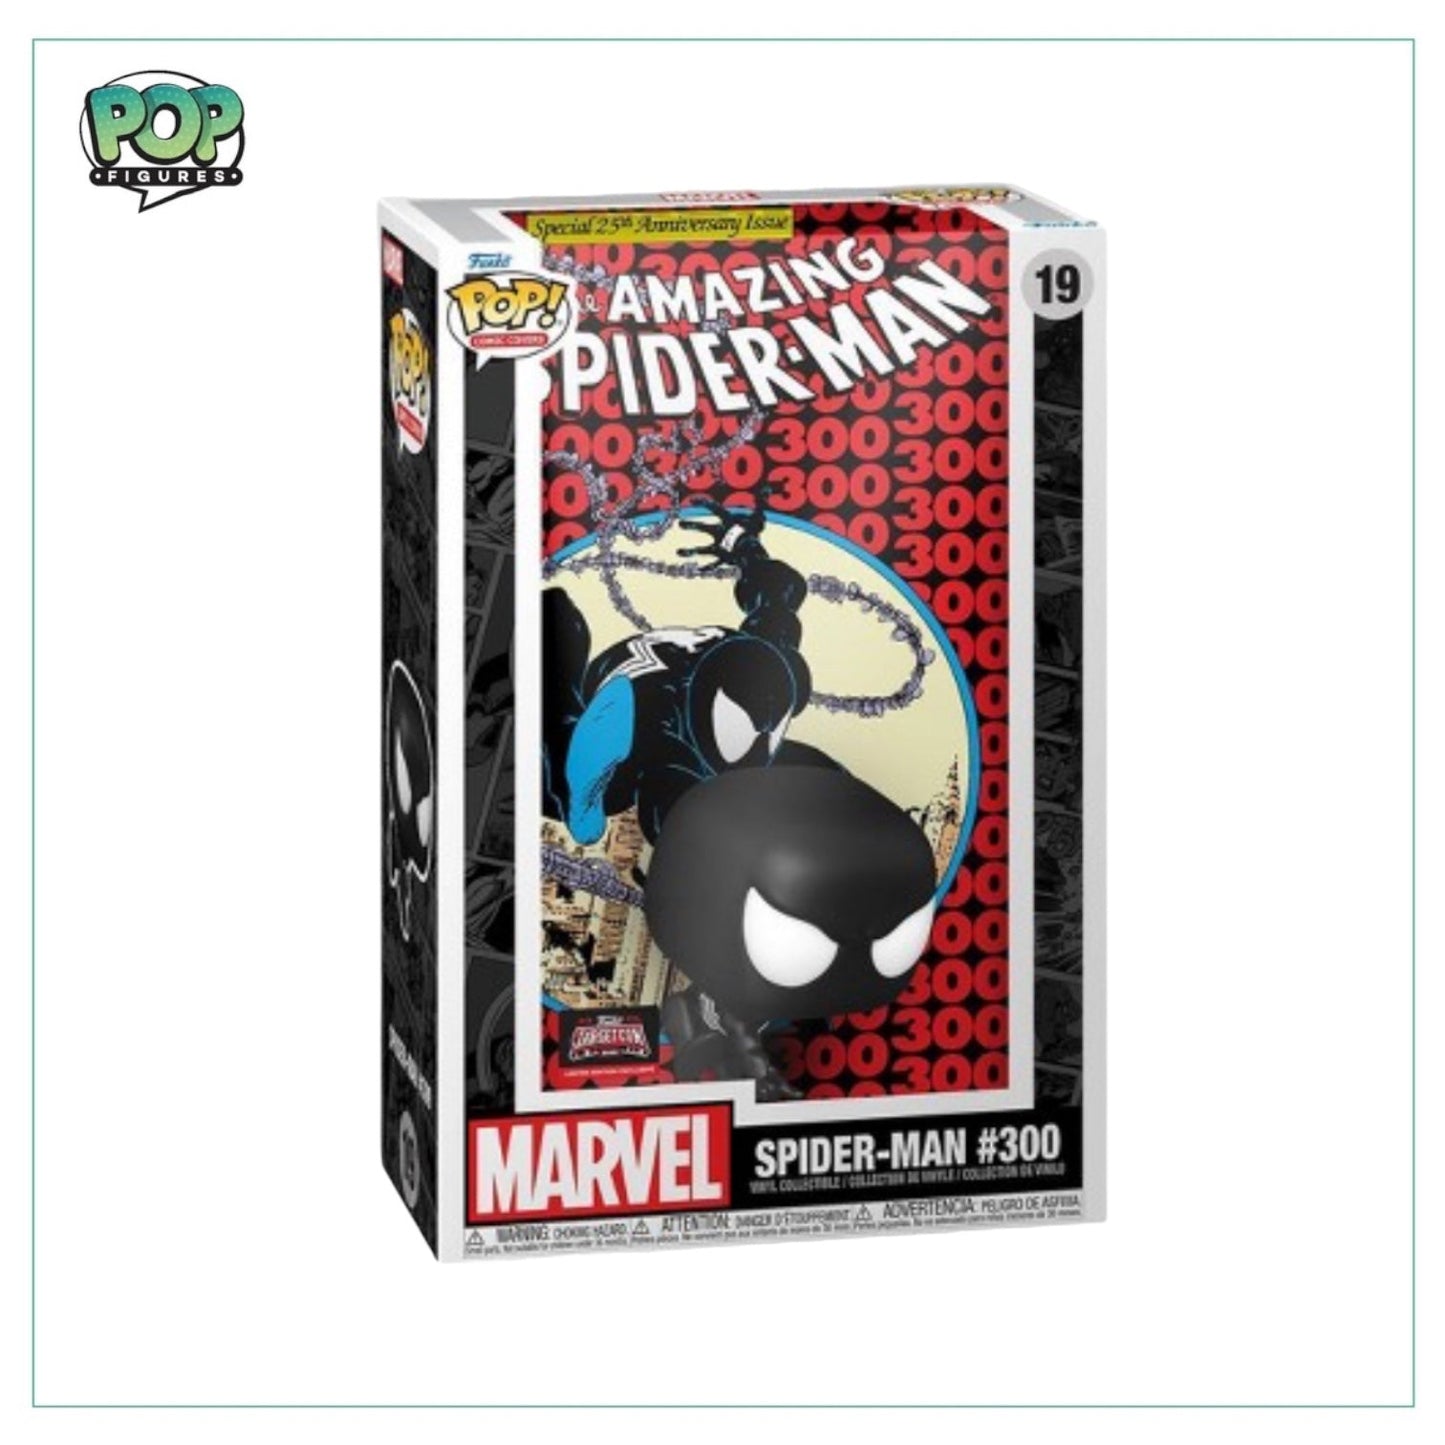 Spider-Man #300 #19 Funko Pop Comic Cover! - Marvel - Target Con 2023 Exclusive - Angry Cat